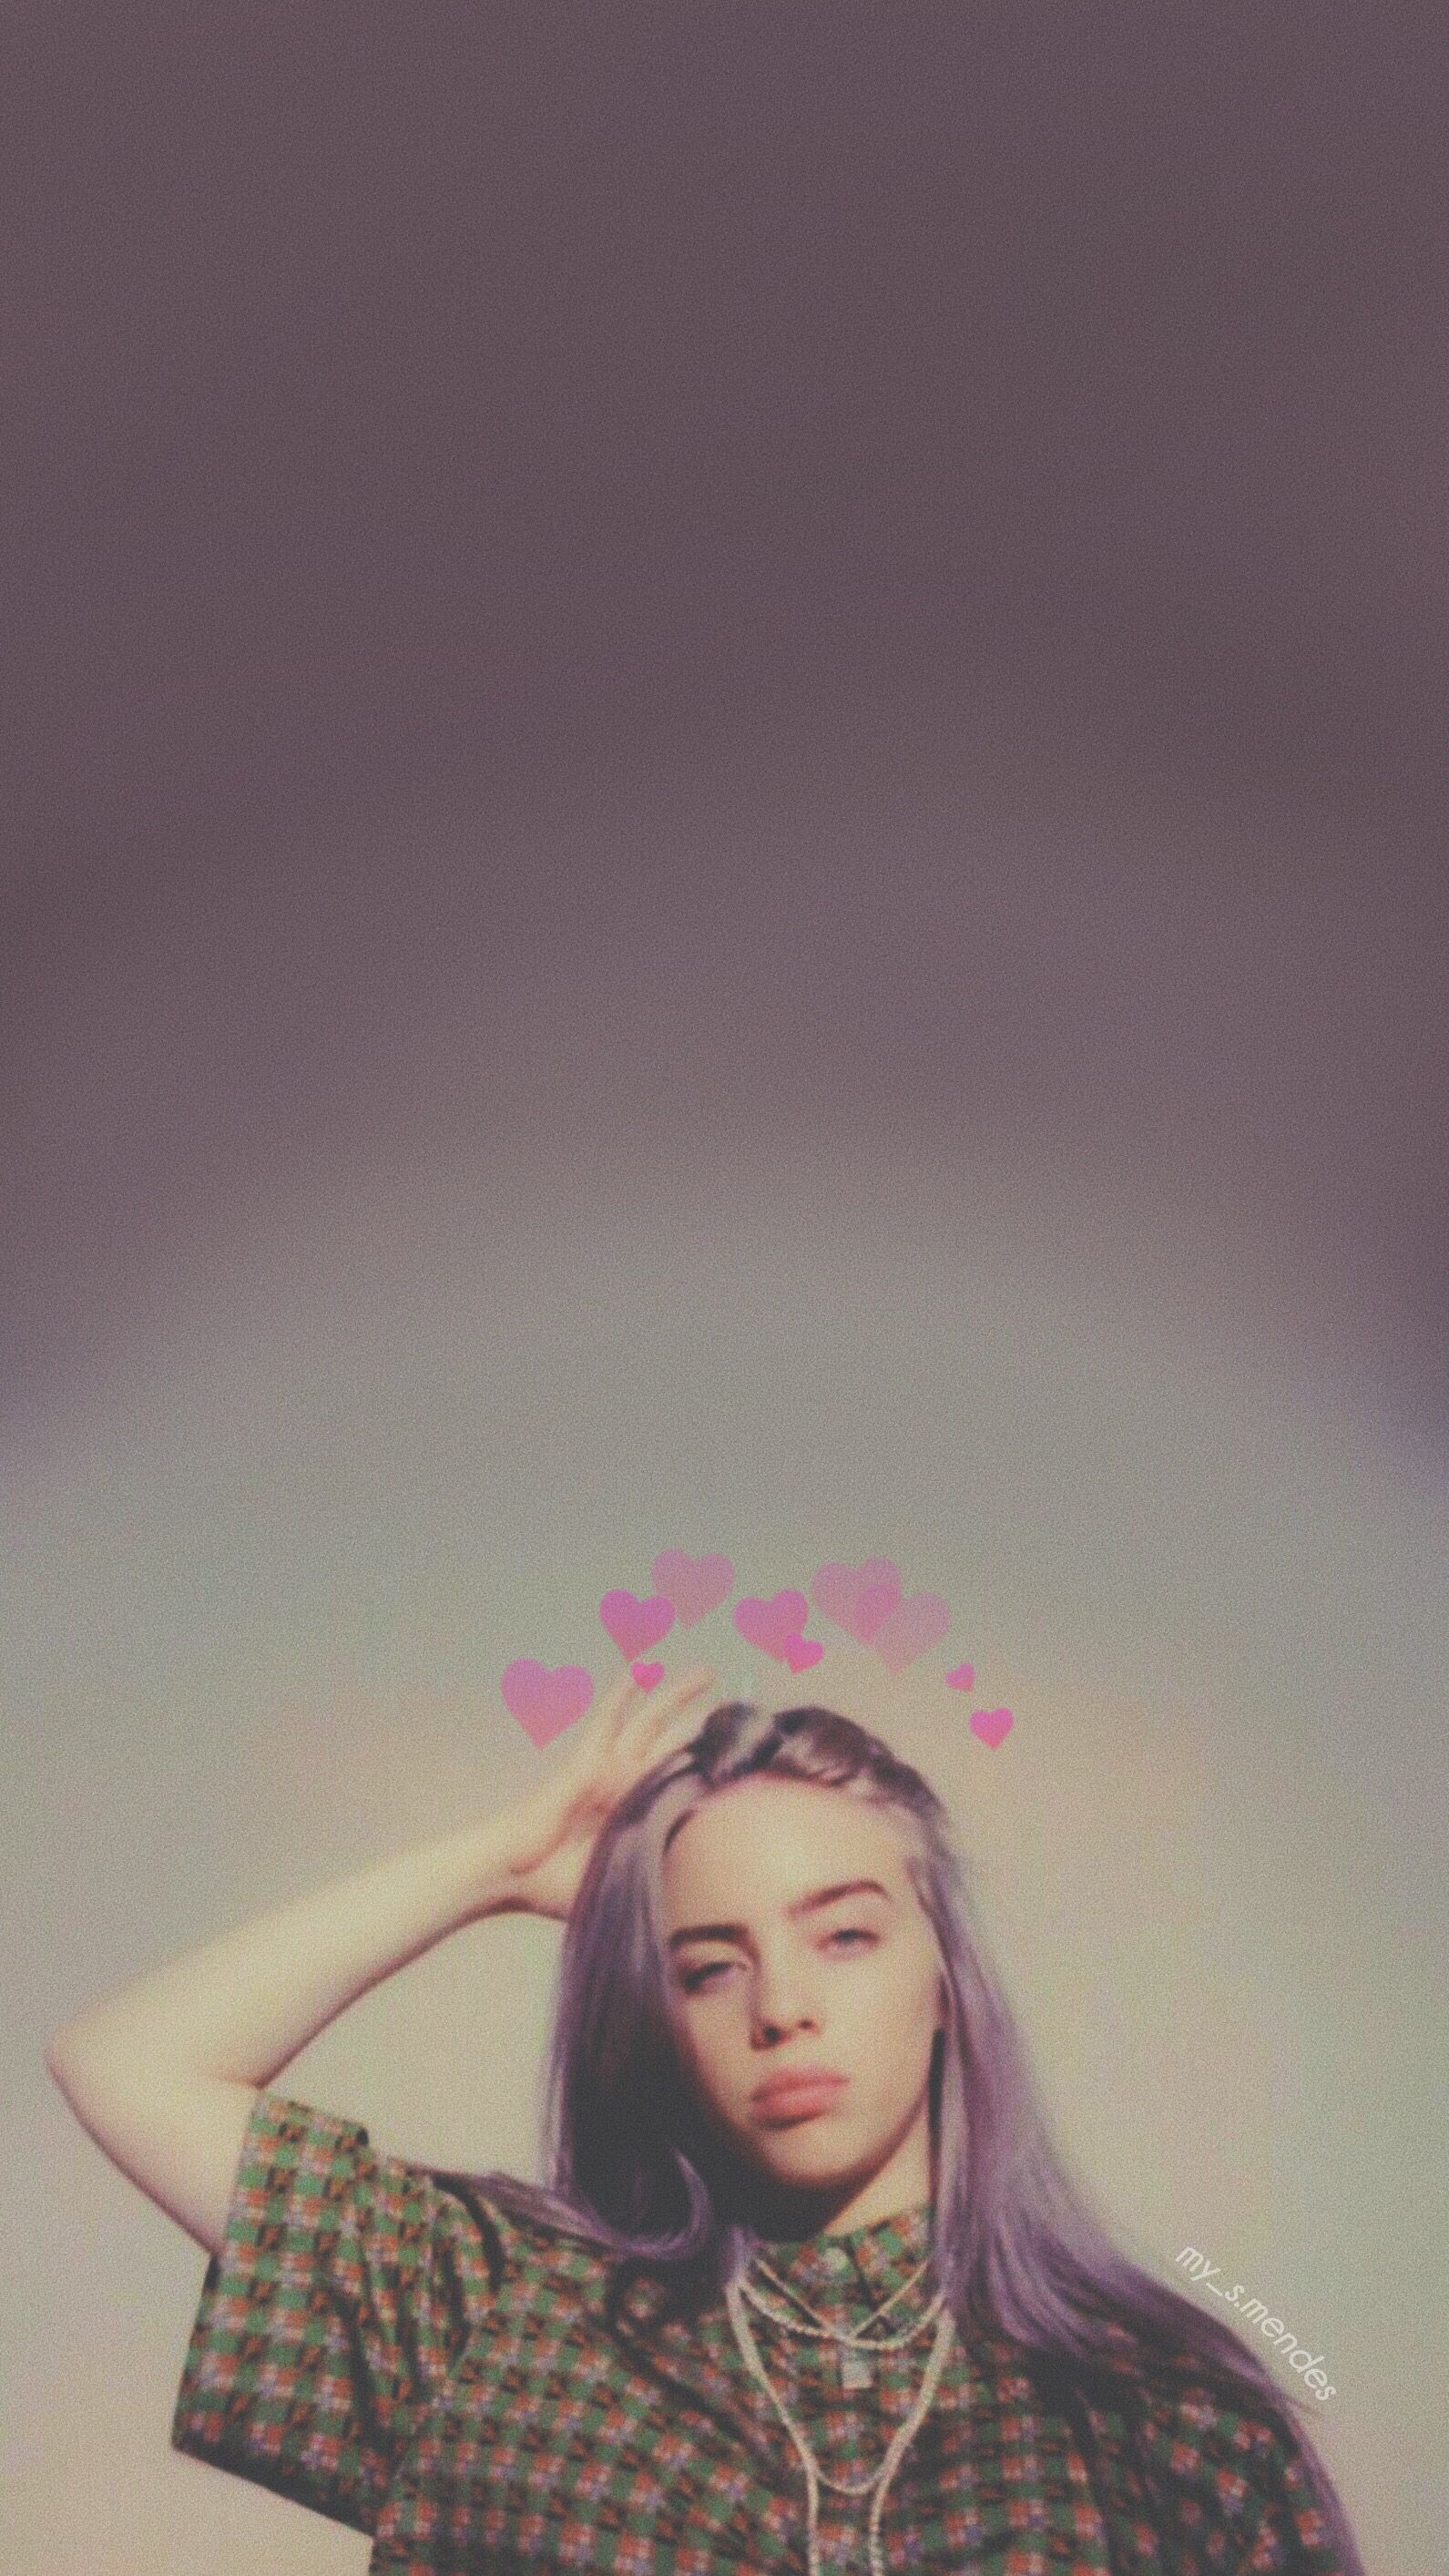 Aesthetic Billie Eilish Pictures Wallpapers - Wallpaper Cave